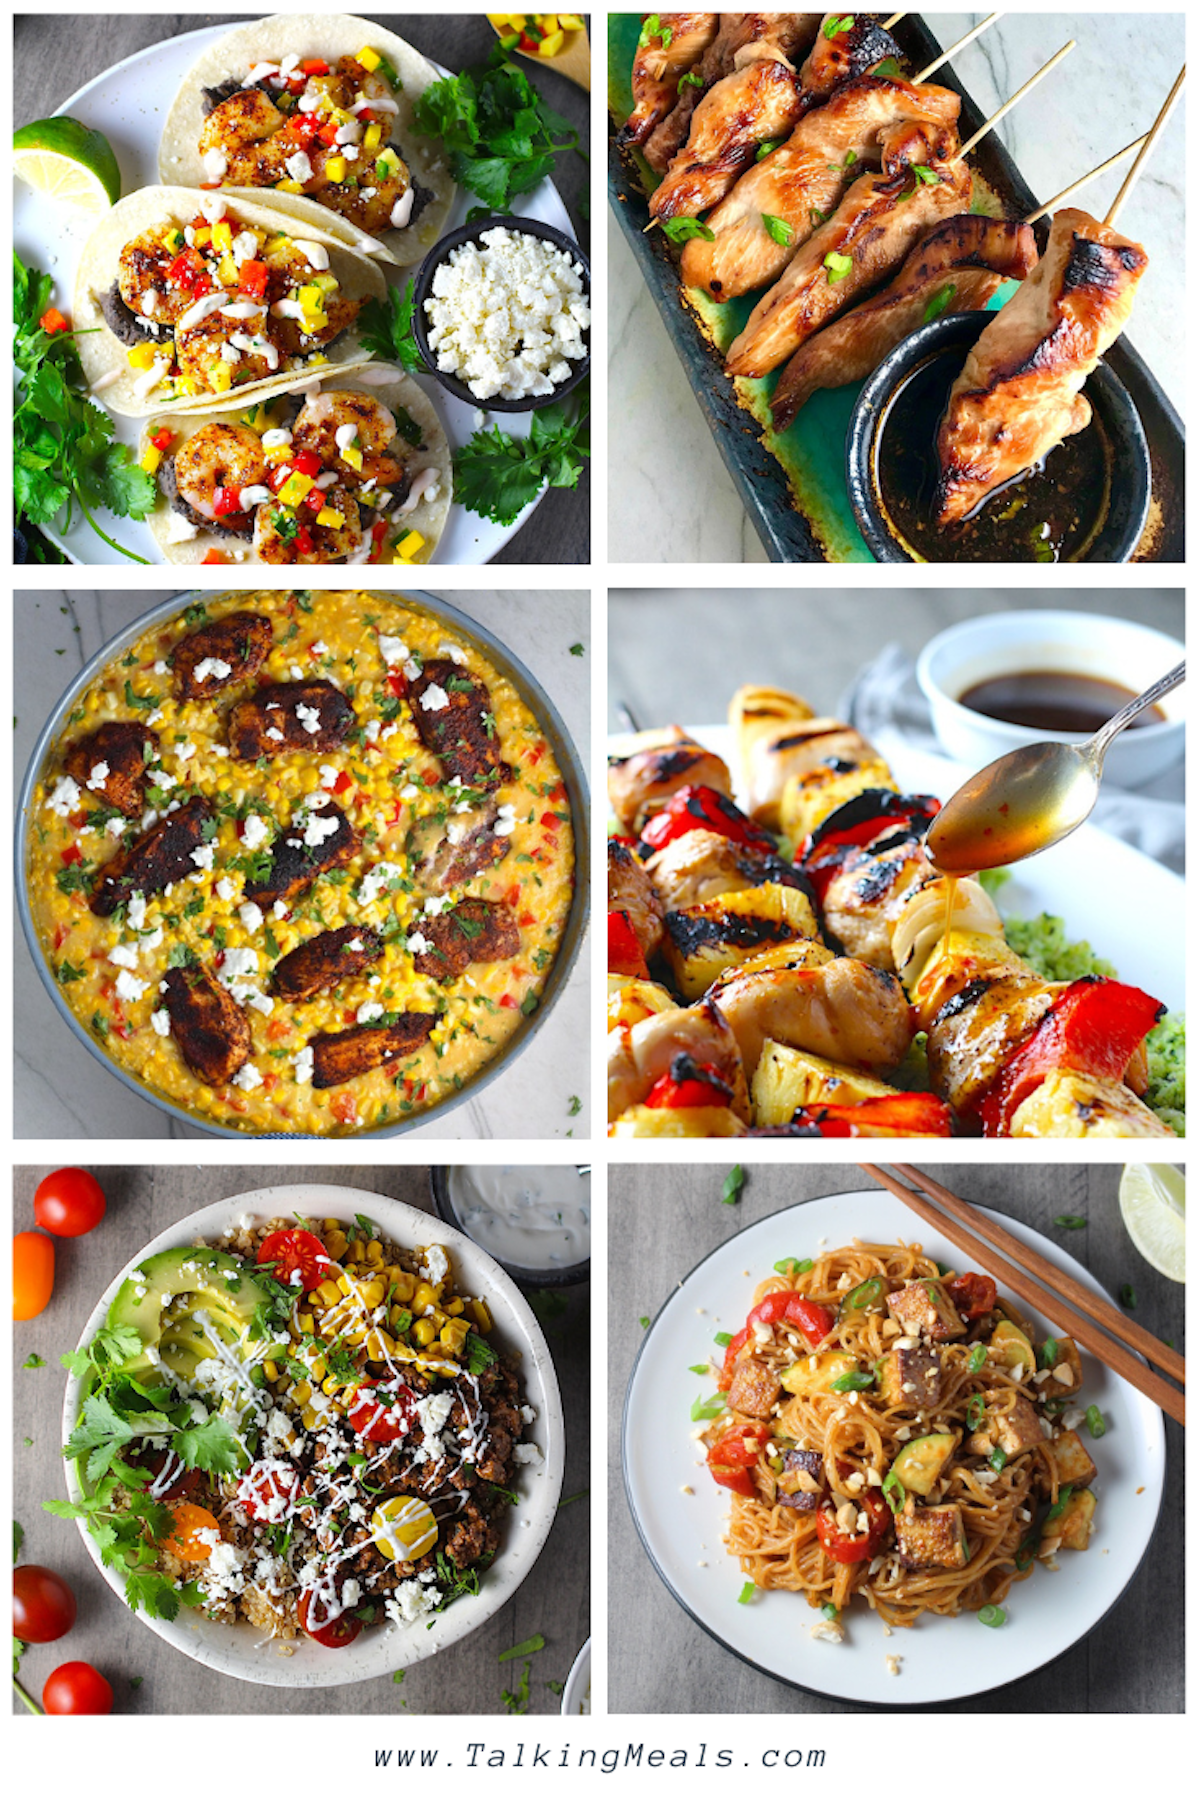 Here are 20 Easy and Light Dinner ideas for Summer that you can make for your busy family!